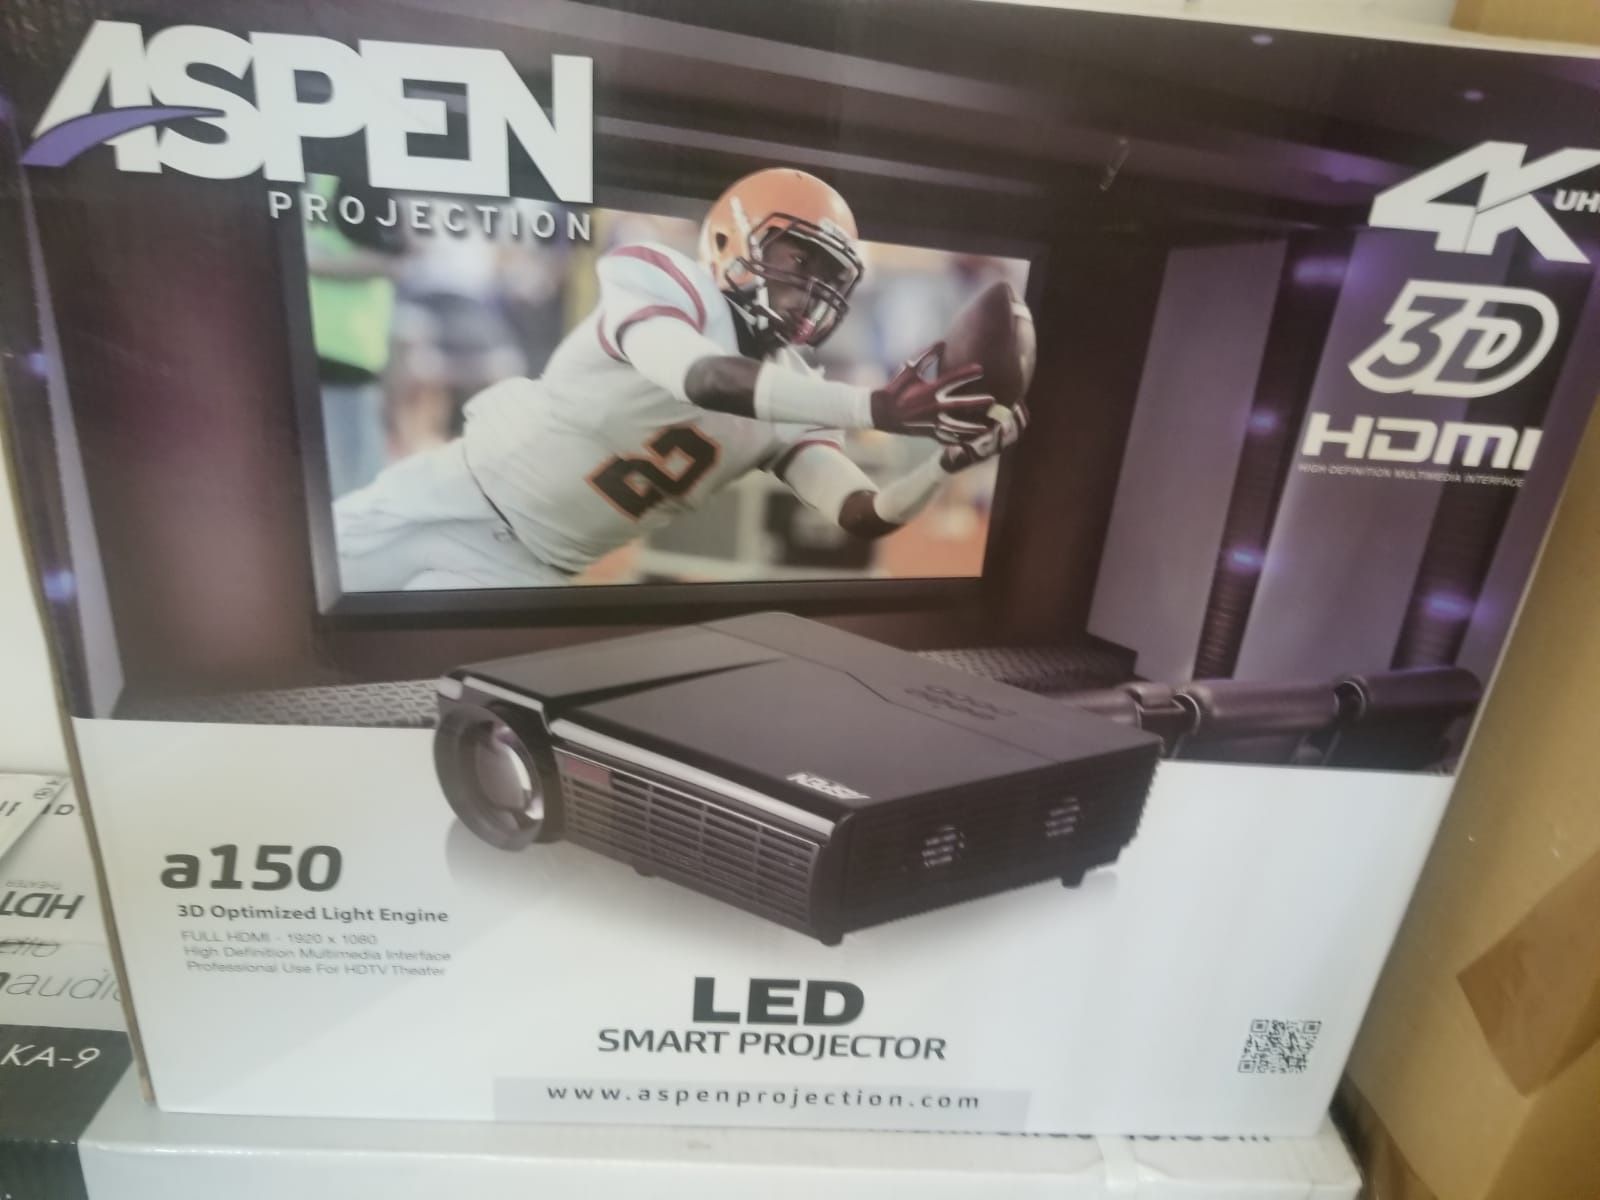 Brand New in Box. Unopened Includes 1.Kamron HD Home Theater System 2.Aspen LED Smart Projector 3. Aspen LED Smart Projector Screen